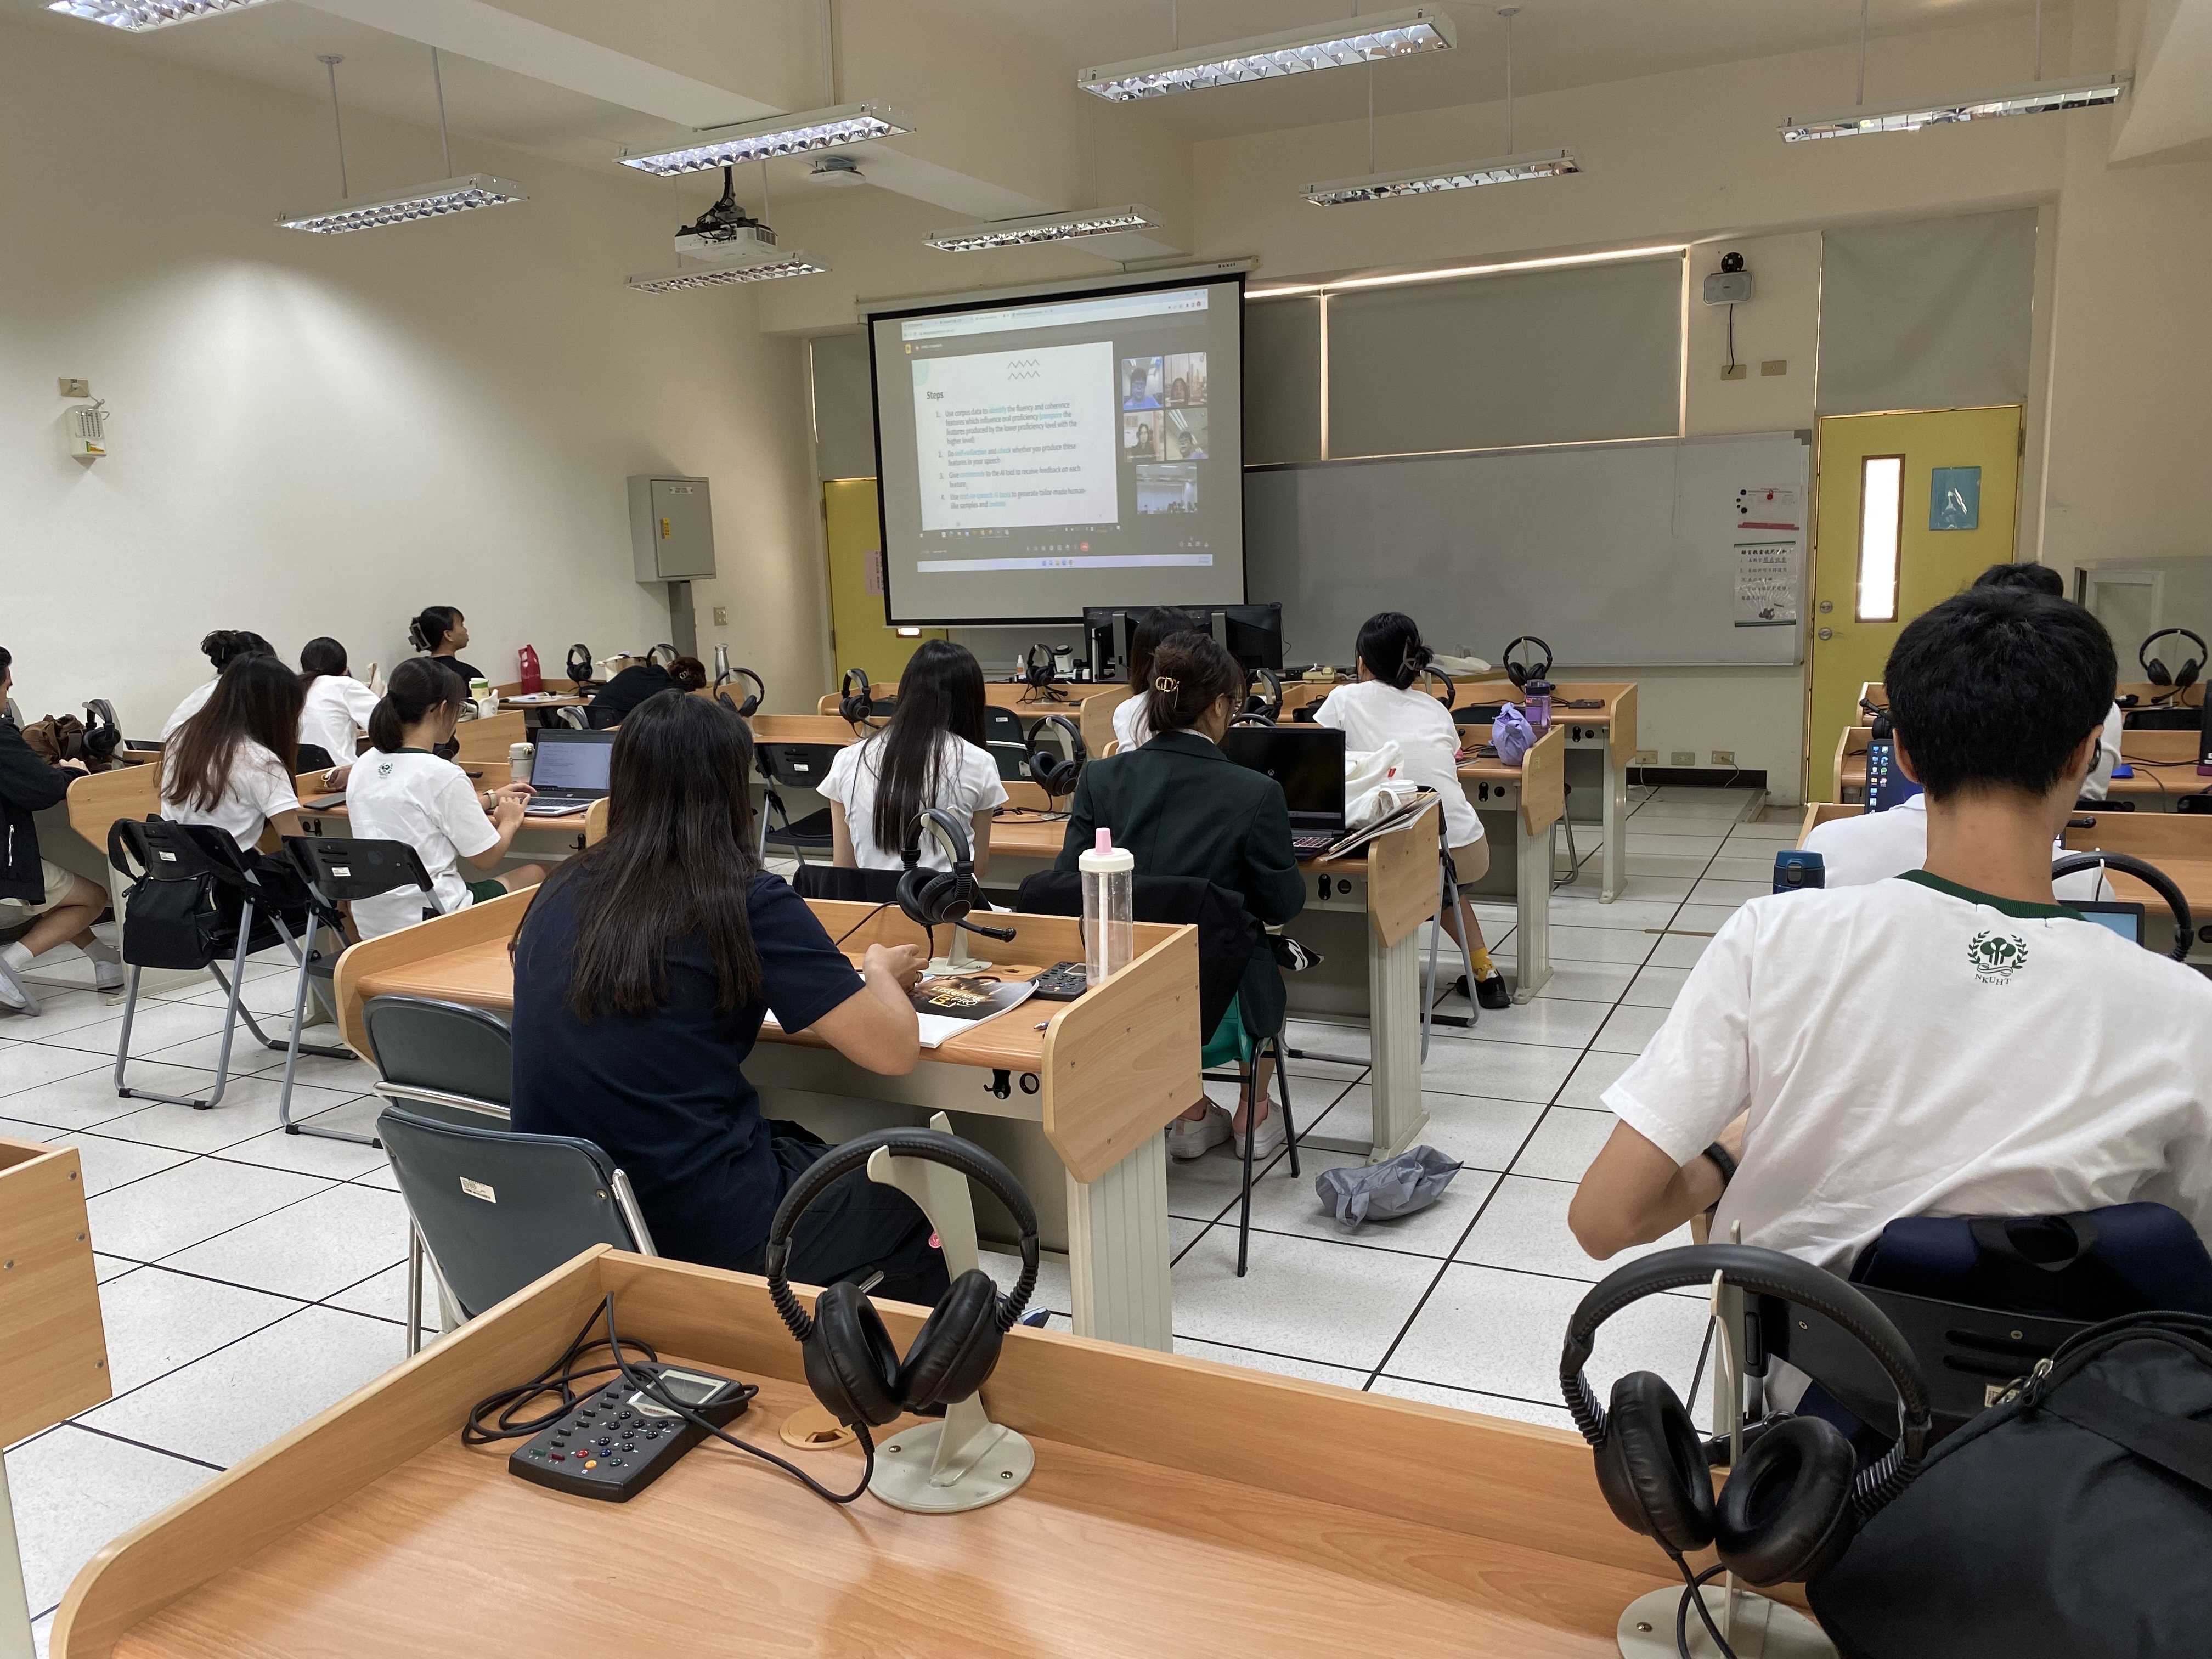 Students from National Kaohsiung University of Hospitality and Tourism attended the online training course